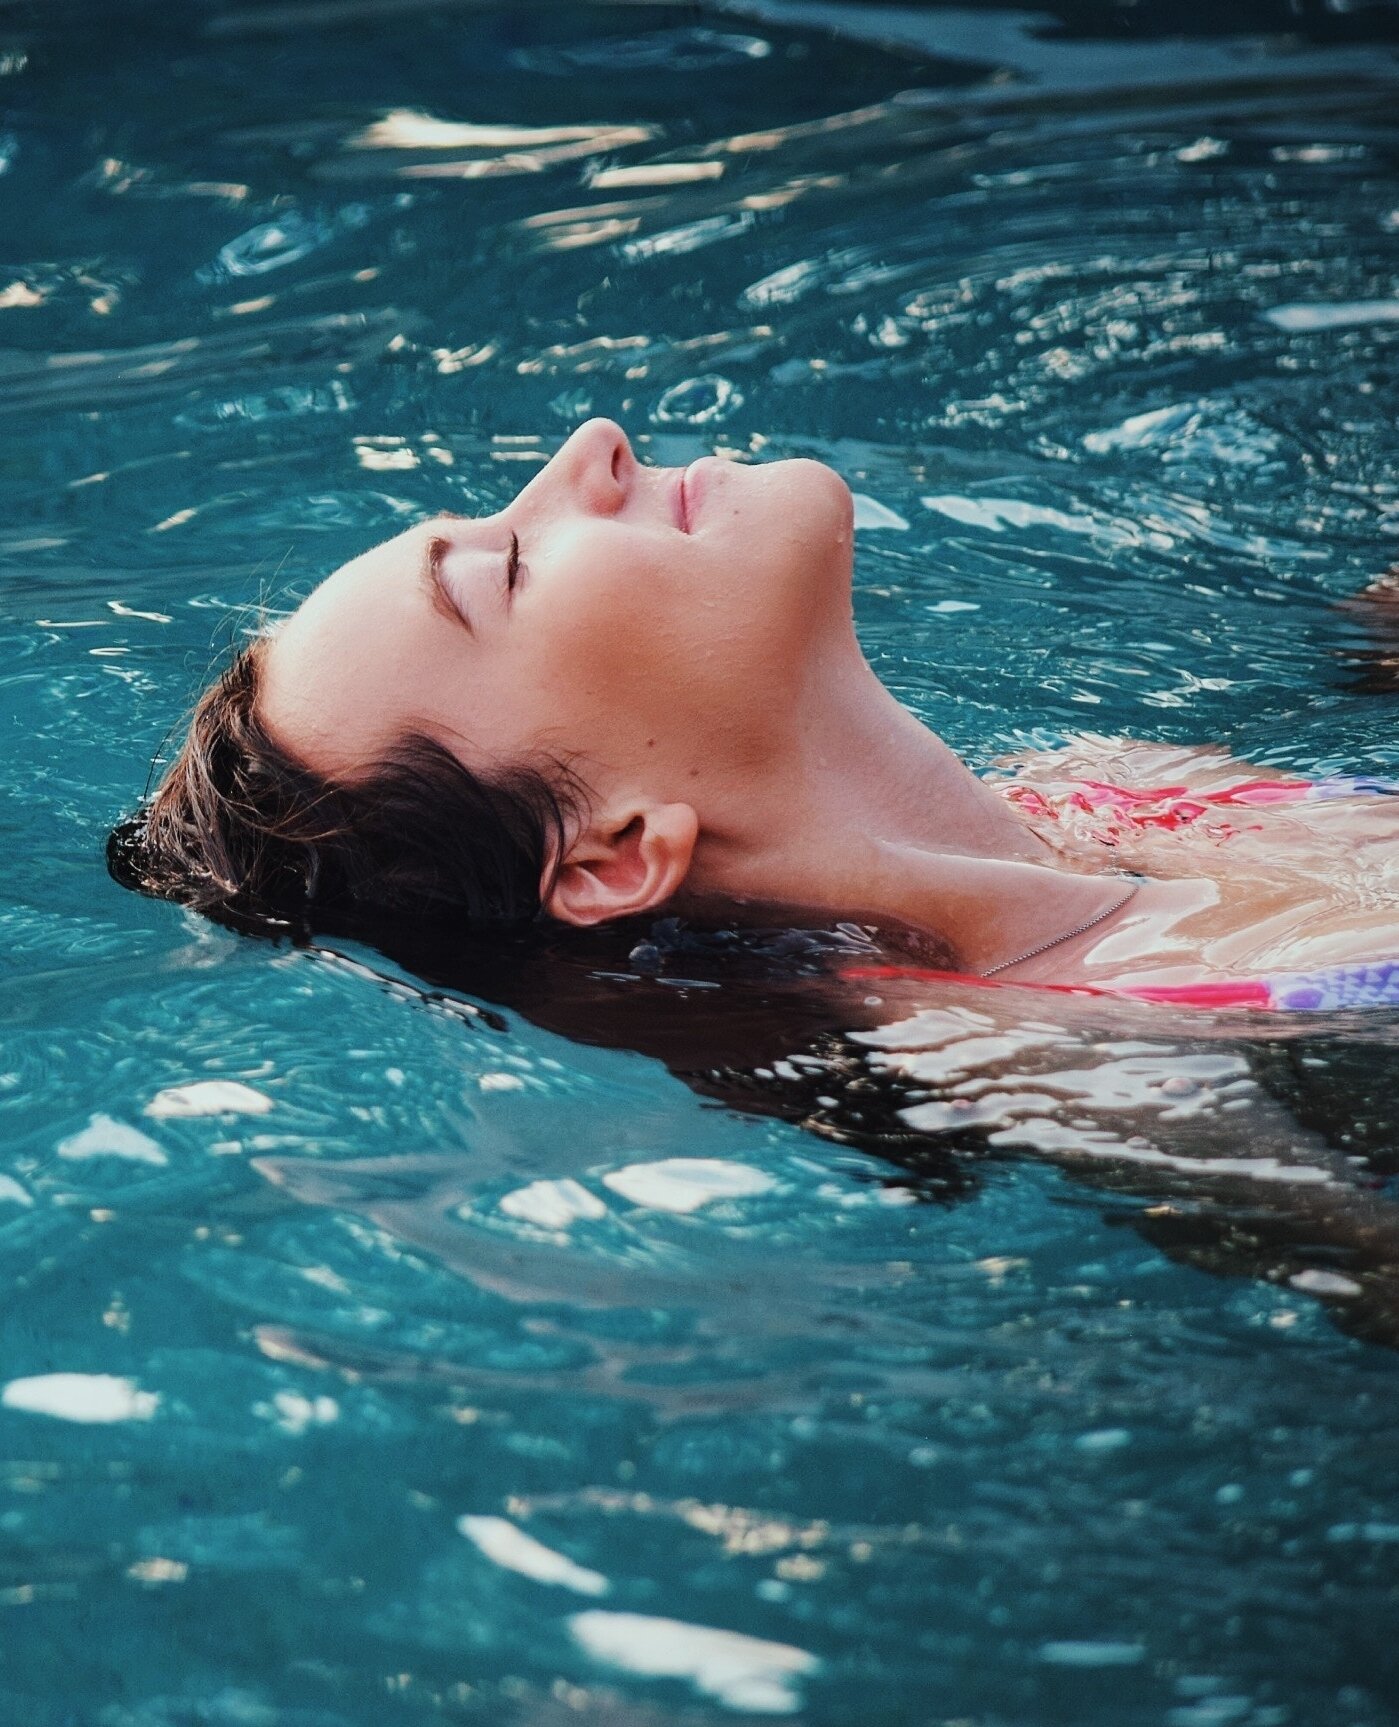 Did you know swimming can help encourage Lymphatic Drainage? ⁠
⁠
When asked about lymph health most people would recommend rebounding as the best exercise however with the external pressure of the water combined with muscle movement, swimming is an e